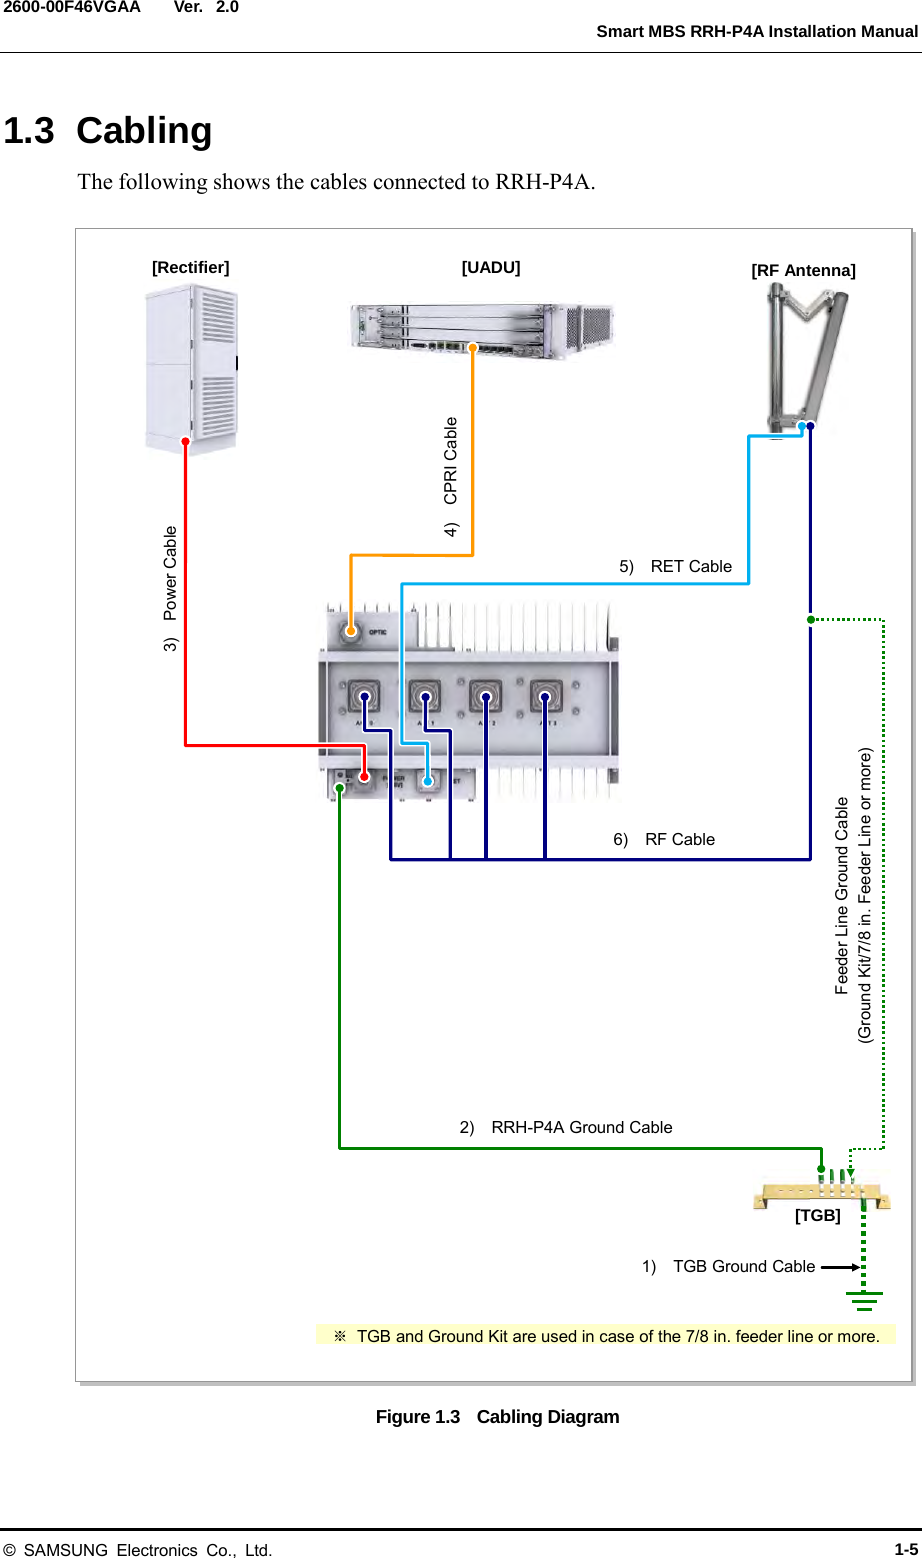  Ver.   Smart MBS RRH-P4A Installation Manual 2600-00F46VGAA 2.0 1.3 Cabling The following shows the cables connected to RRH-P4A.  Figure 1.3    Cabling Diagram  [RF Antenna] 1)  TGB Ground Cable [TGB] Feeder Line Ground Cable (Ground Kit/7/8 in. Feeder Line or more) ※ TGB and Ground Kit are used in case of the 7/8 in. feeder line or more. [Rectifier] [UADU] 3)    Power Cable 4)  CPRI Cable 5)   RET Cable 6)  RF Cable 2)   RRH-P4A Ground Cable © SAMSUNG Electronics Co., Ltd. 1-5 